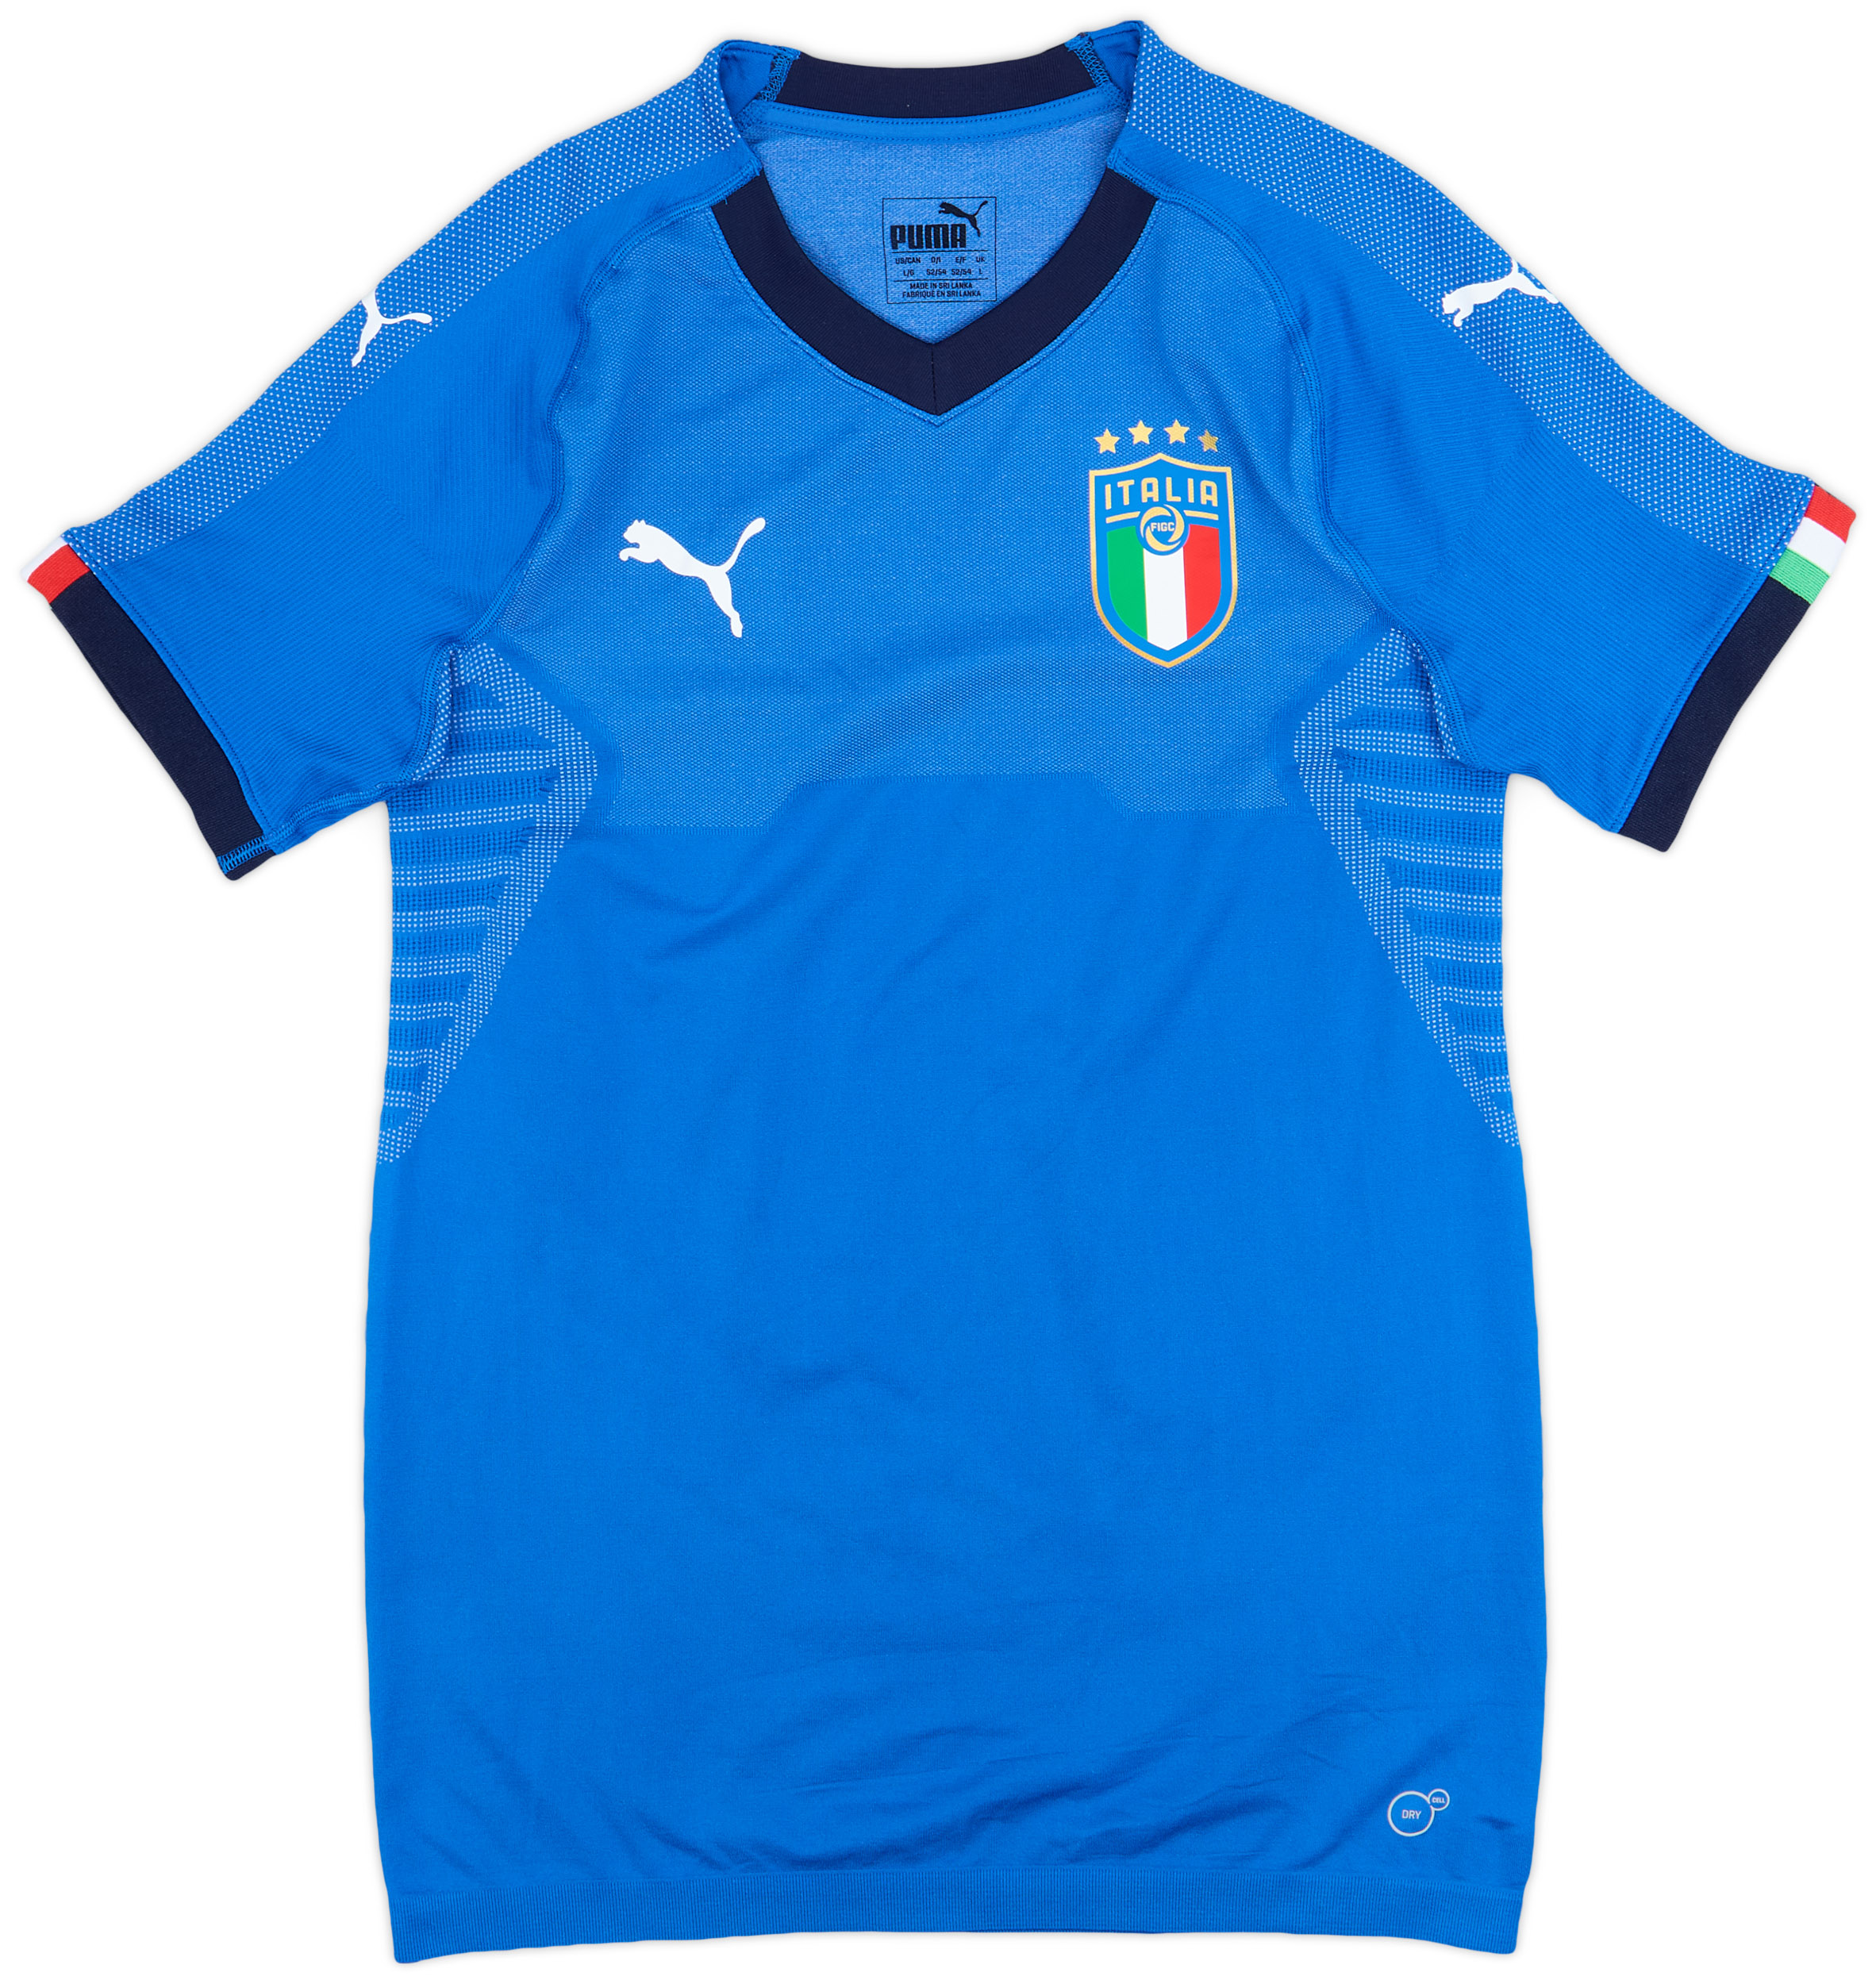 2018-19 Italy Authentic Home Shirt - 9/10 - ()